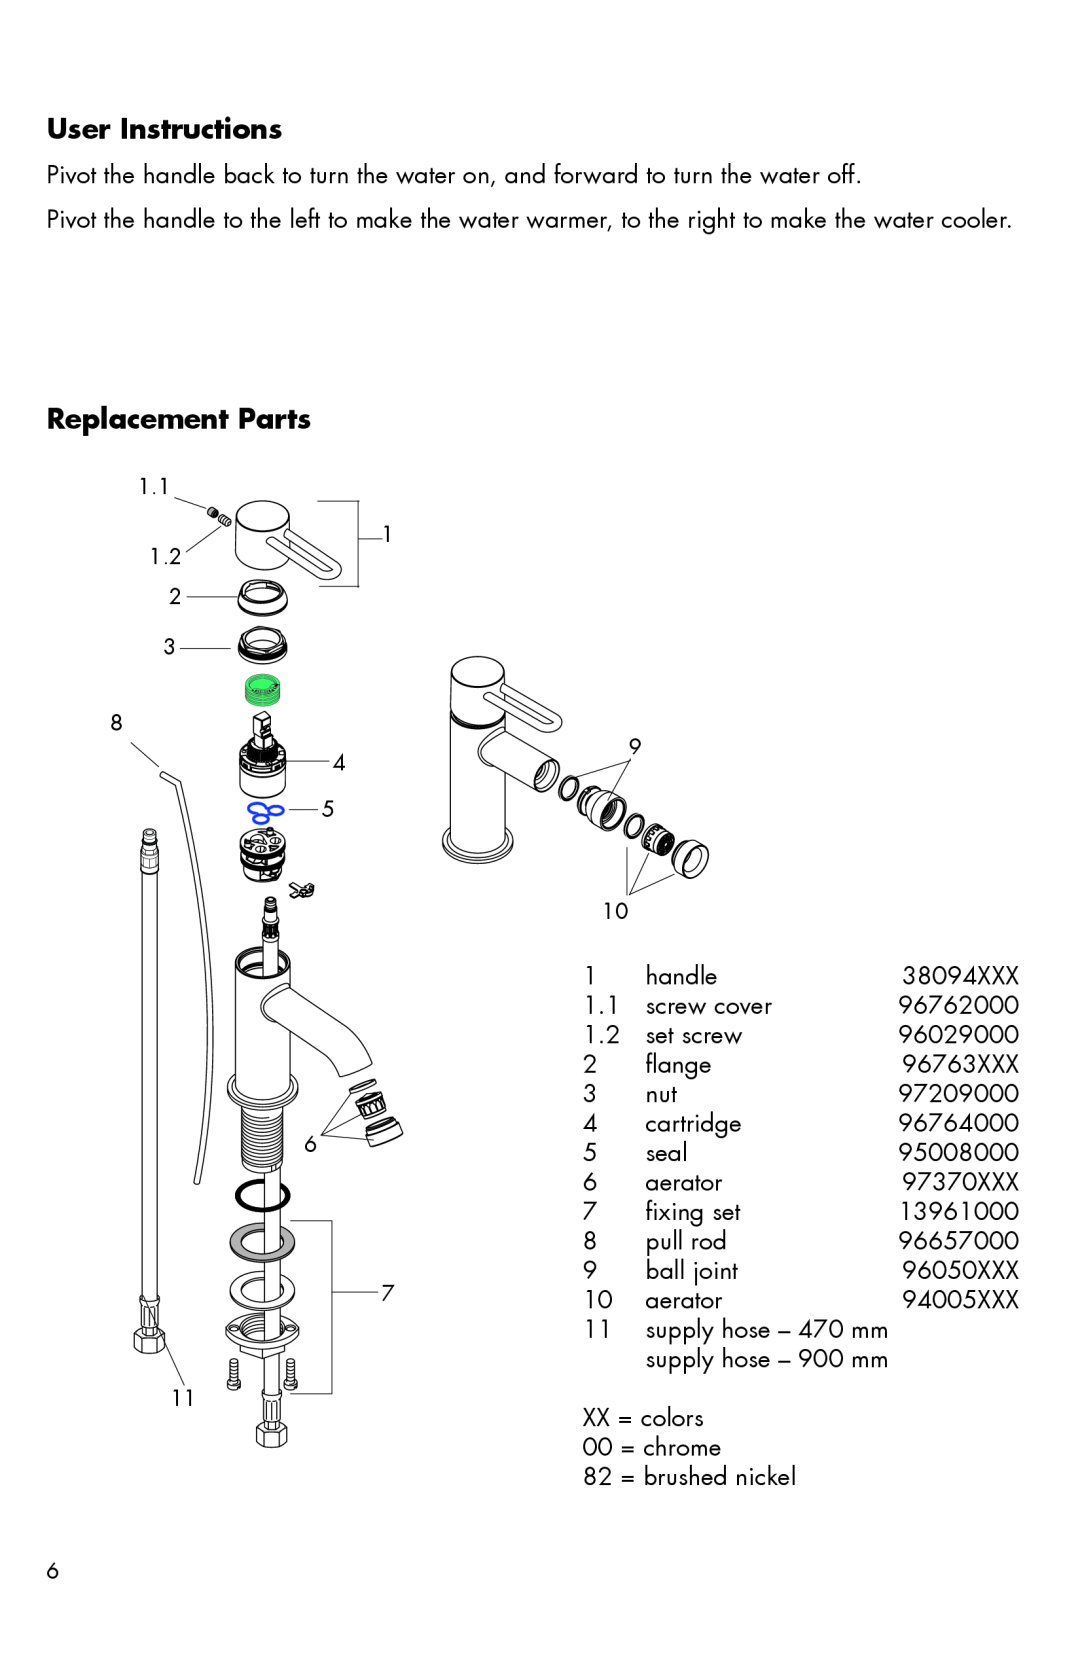 Axor 3802XX1, 38210XX1, 38025XX1 User Instructions, Replacement Parts, 1.1 1.2, supply hose - 470 mm supply hose - 900 mm 